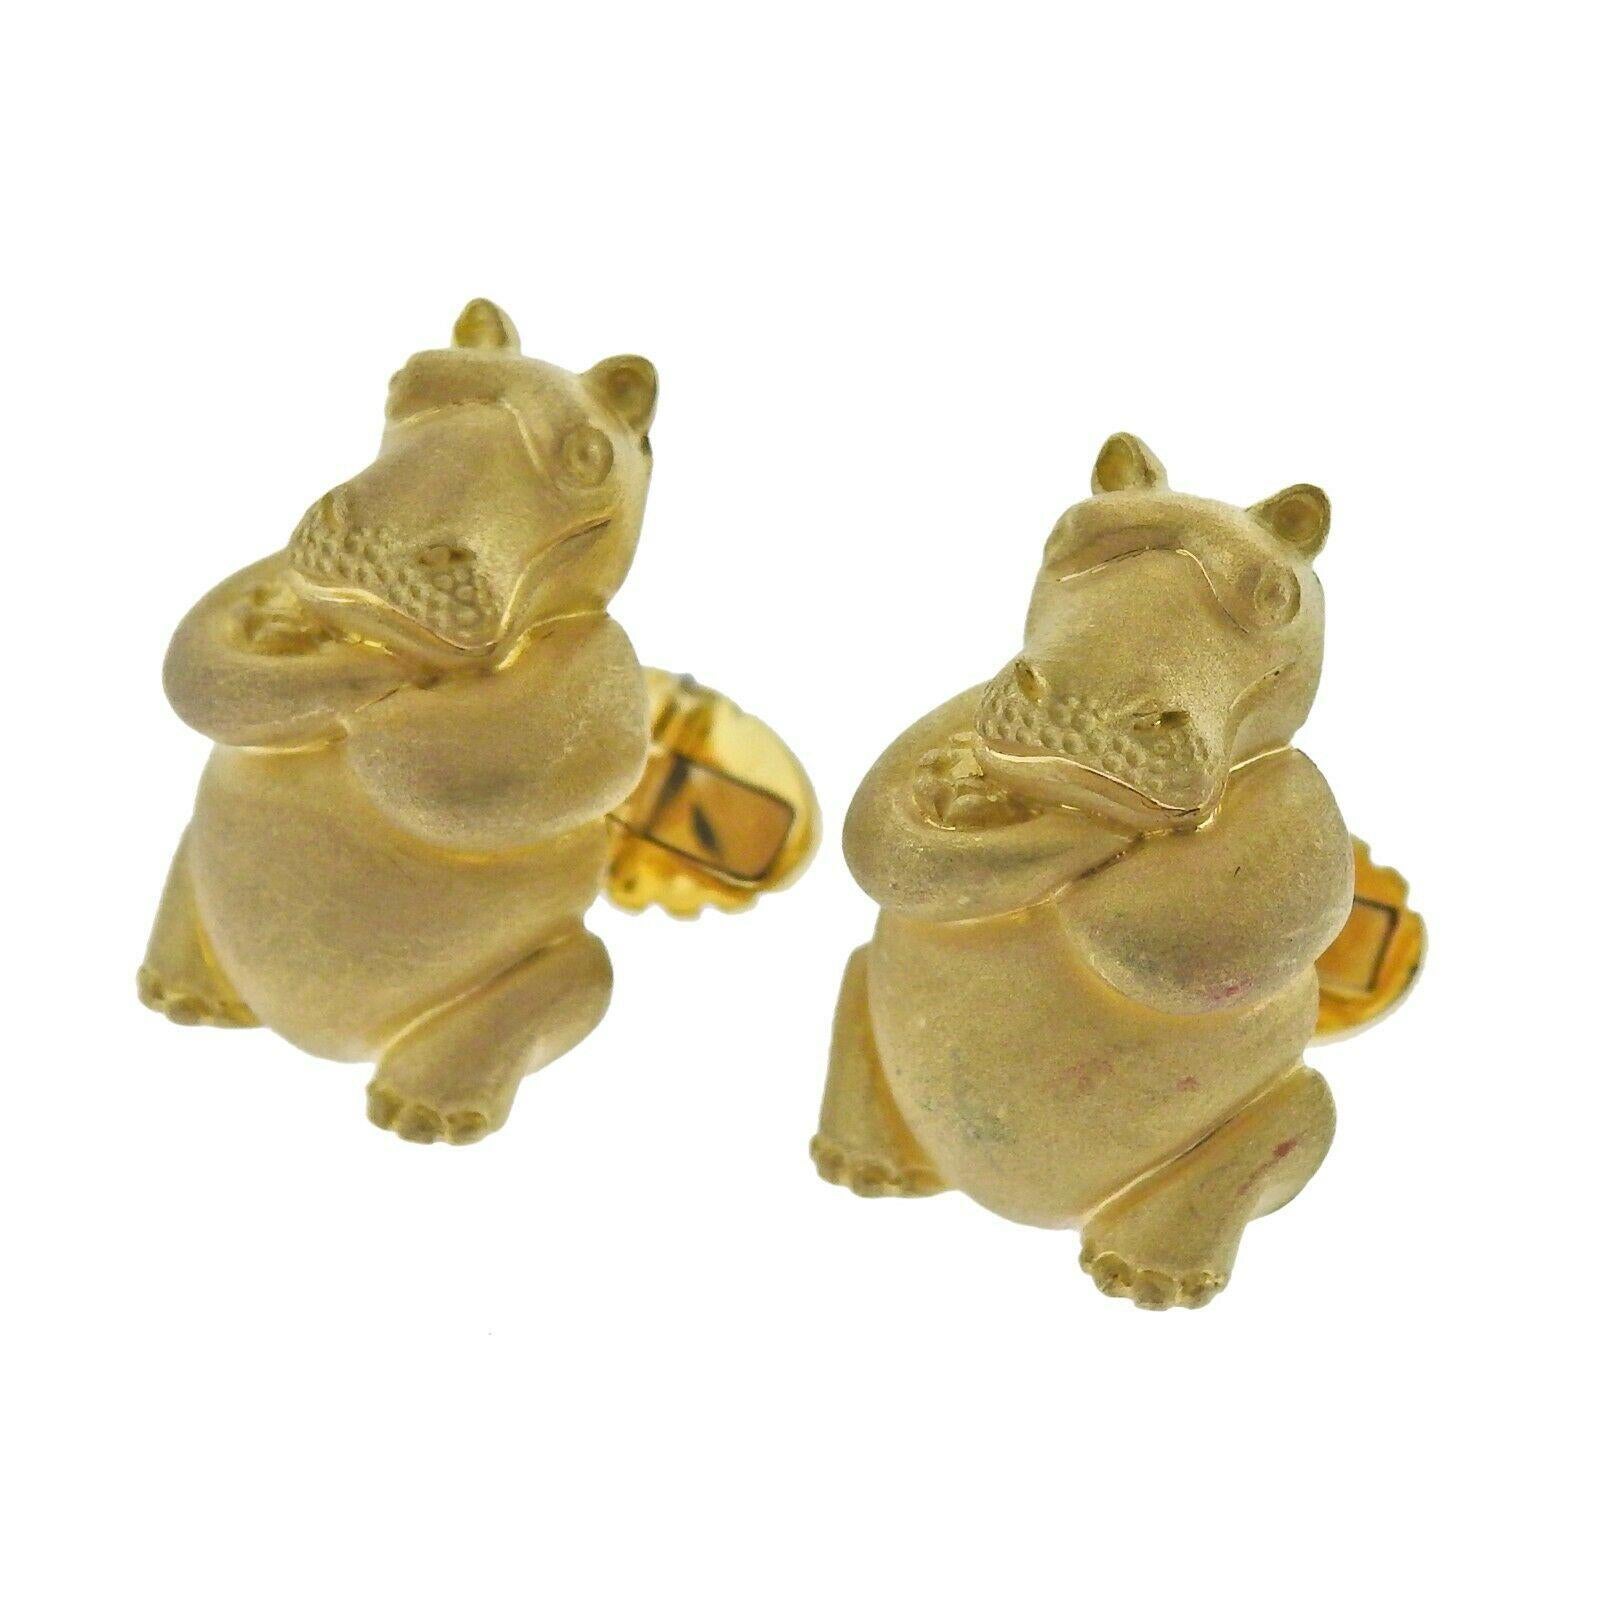 Pair of 18k yellow gold Hippo cufflinks by Henry Dunay. Cufflink top is 27mm x 20mm. Marked: D9018, Dunay 18k. Weight - 27.9 grams.